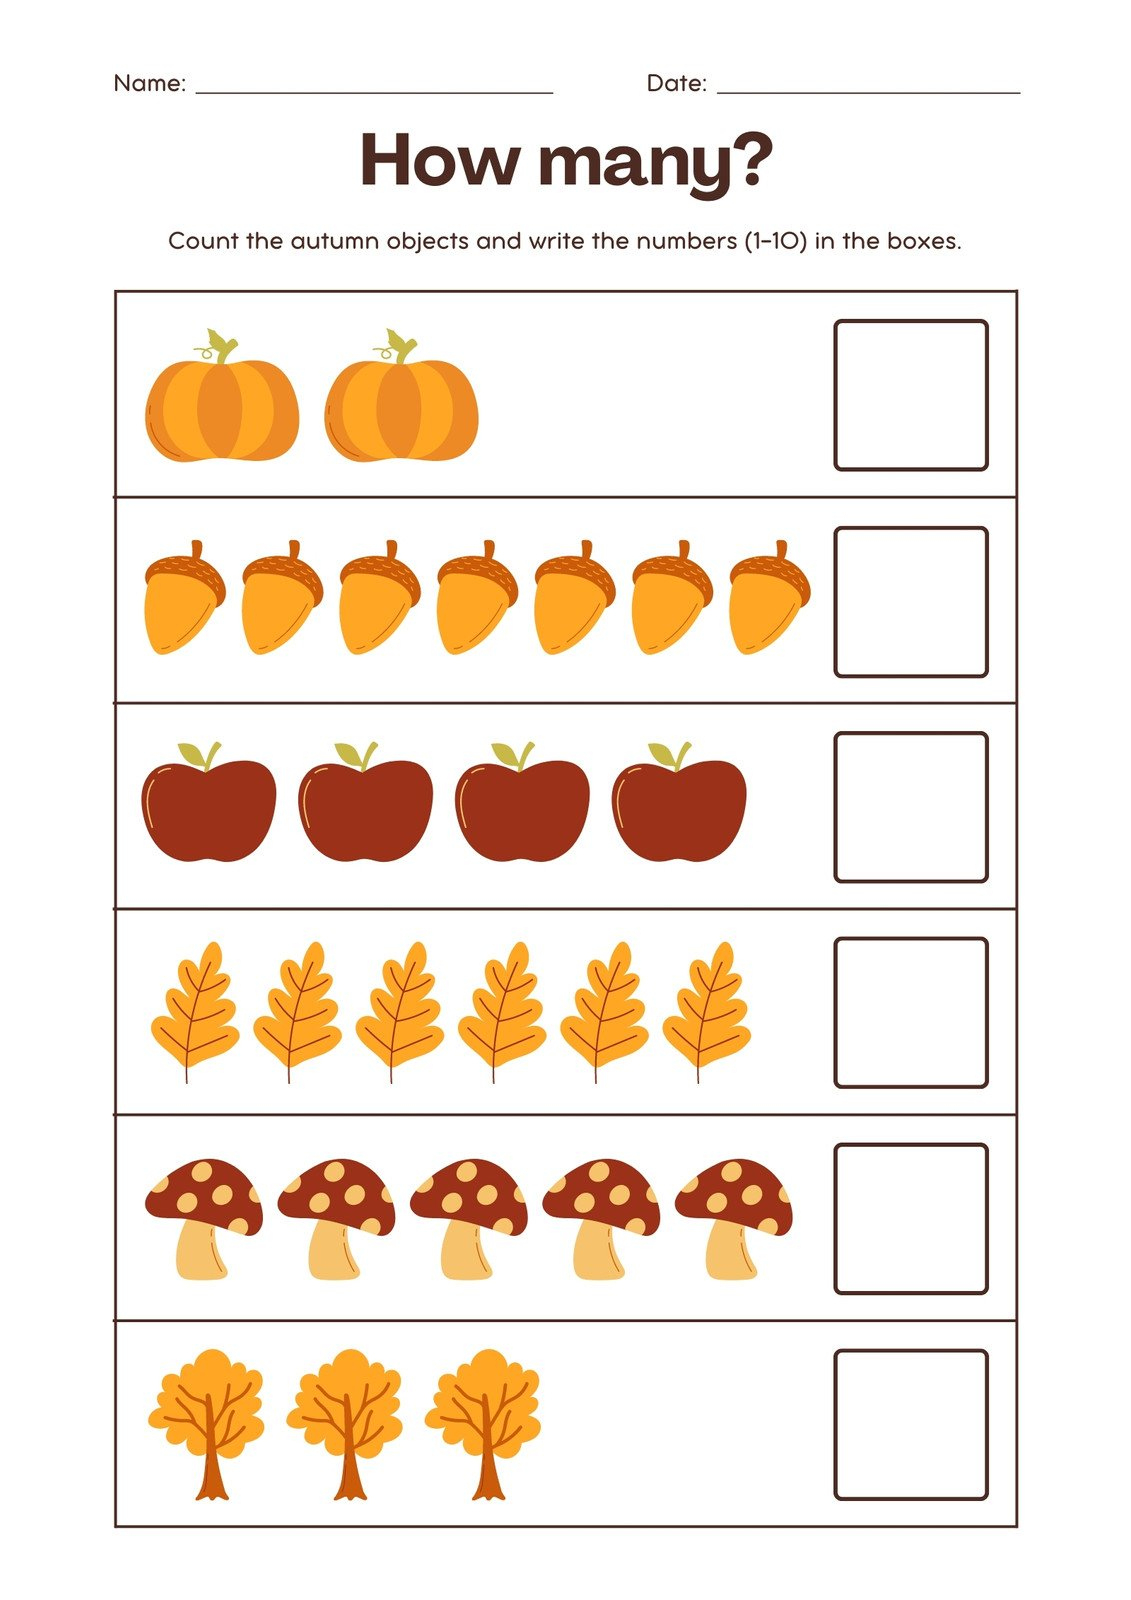 Free To Edit Autumn-Themed Worksheet Templates | Canva intended for Free Printable Autumn Worksheets